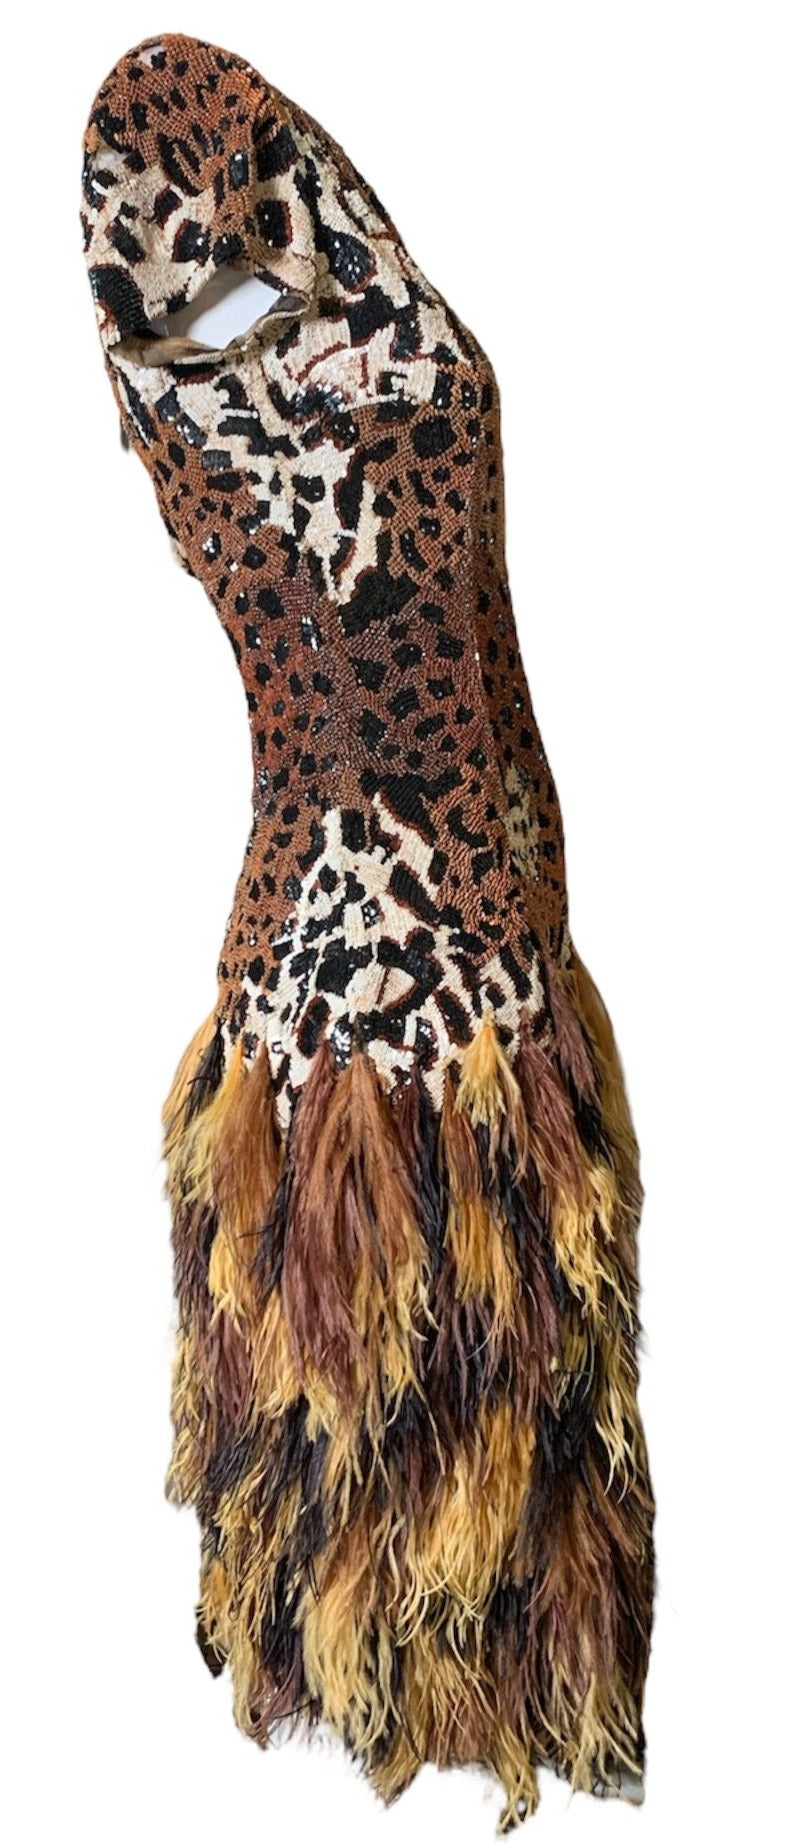 Naeem Khan Animal Print Sequined and Beaded Dress SIDE 2 of 5